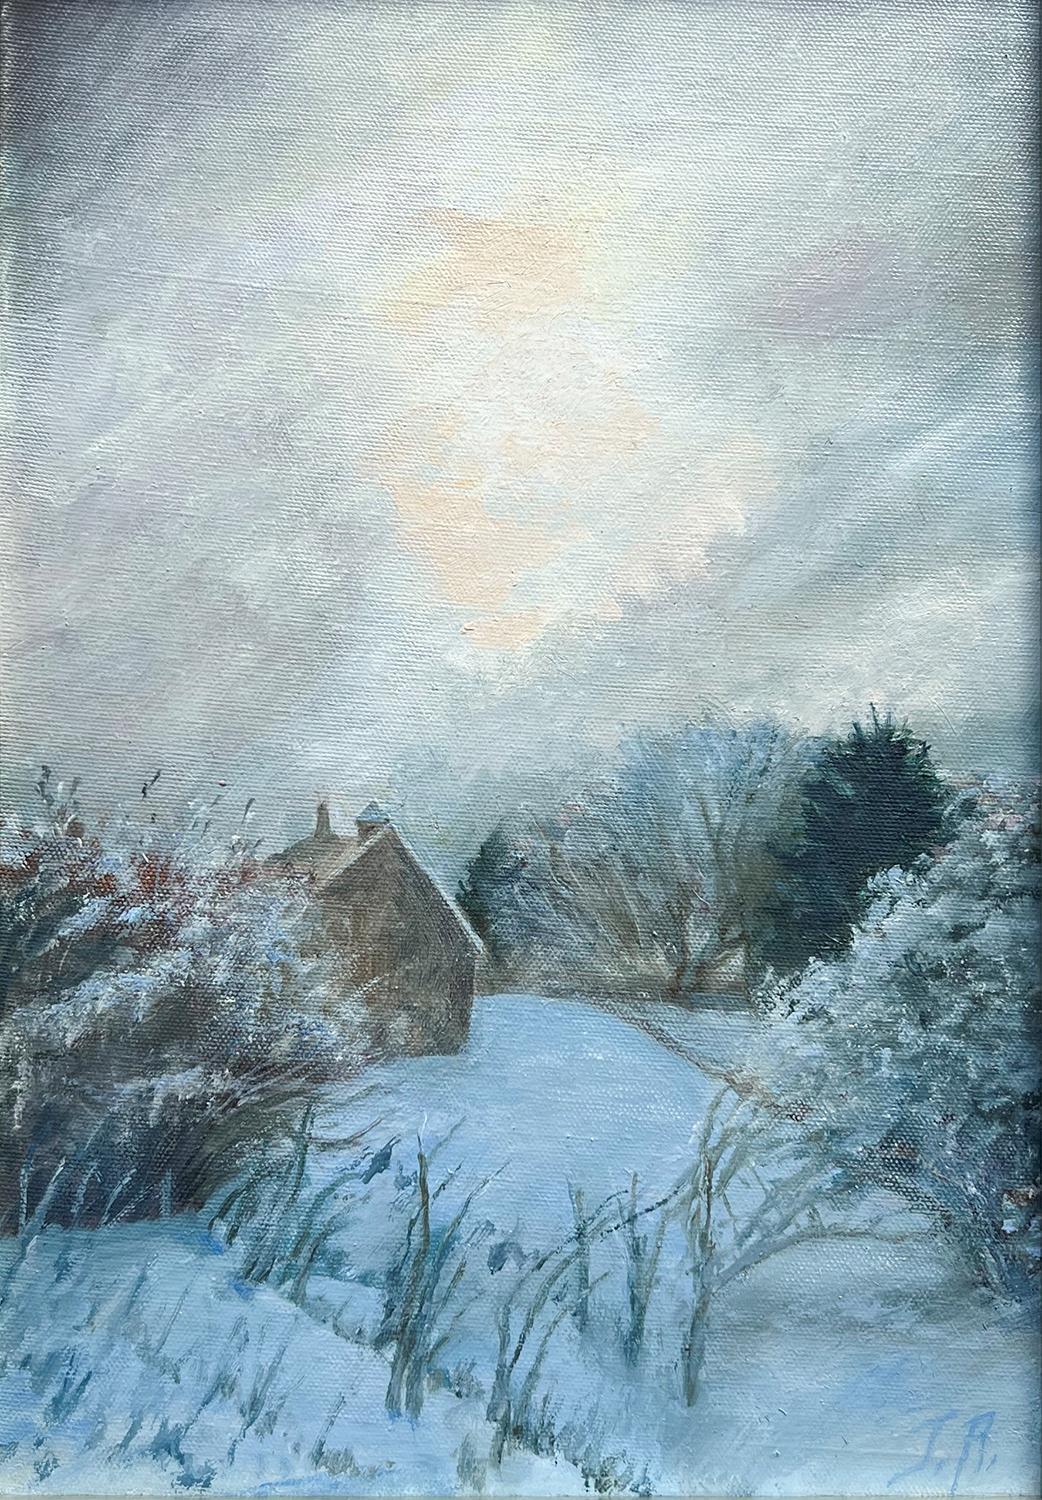 Maine Snowfall (Traditional Plein Air Landscape Painting, Winter Scene) by Judy Reynolds
Oil on canvas, 14 x 11 inches, silver frame


Most people choose to visit Maine during the summertime, when it is a temperate 